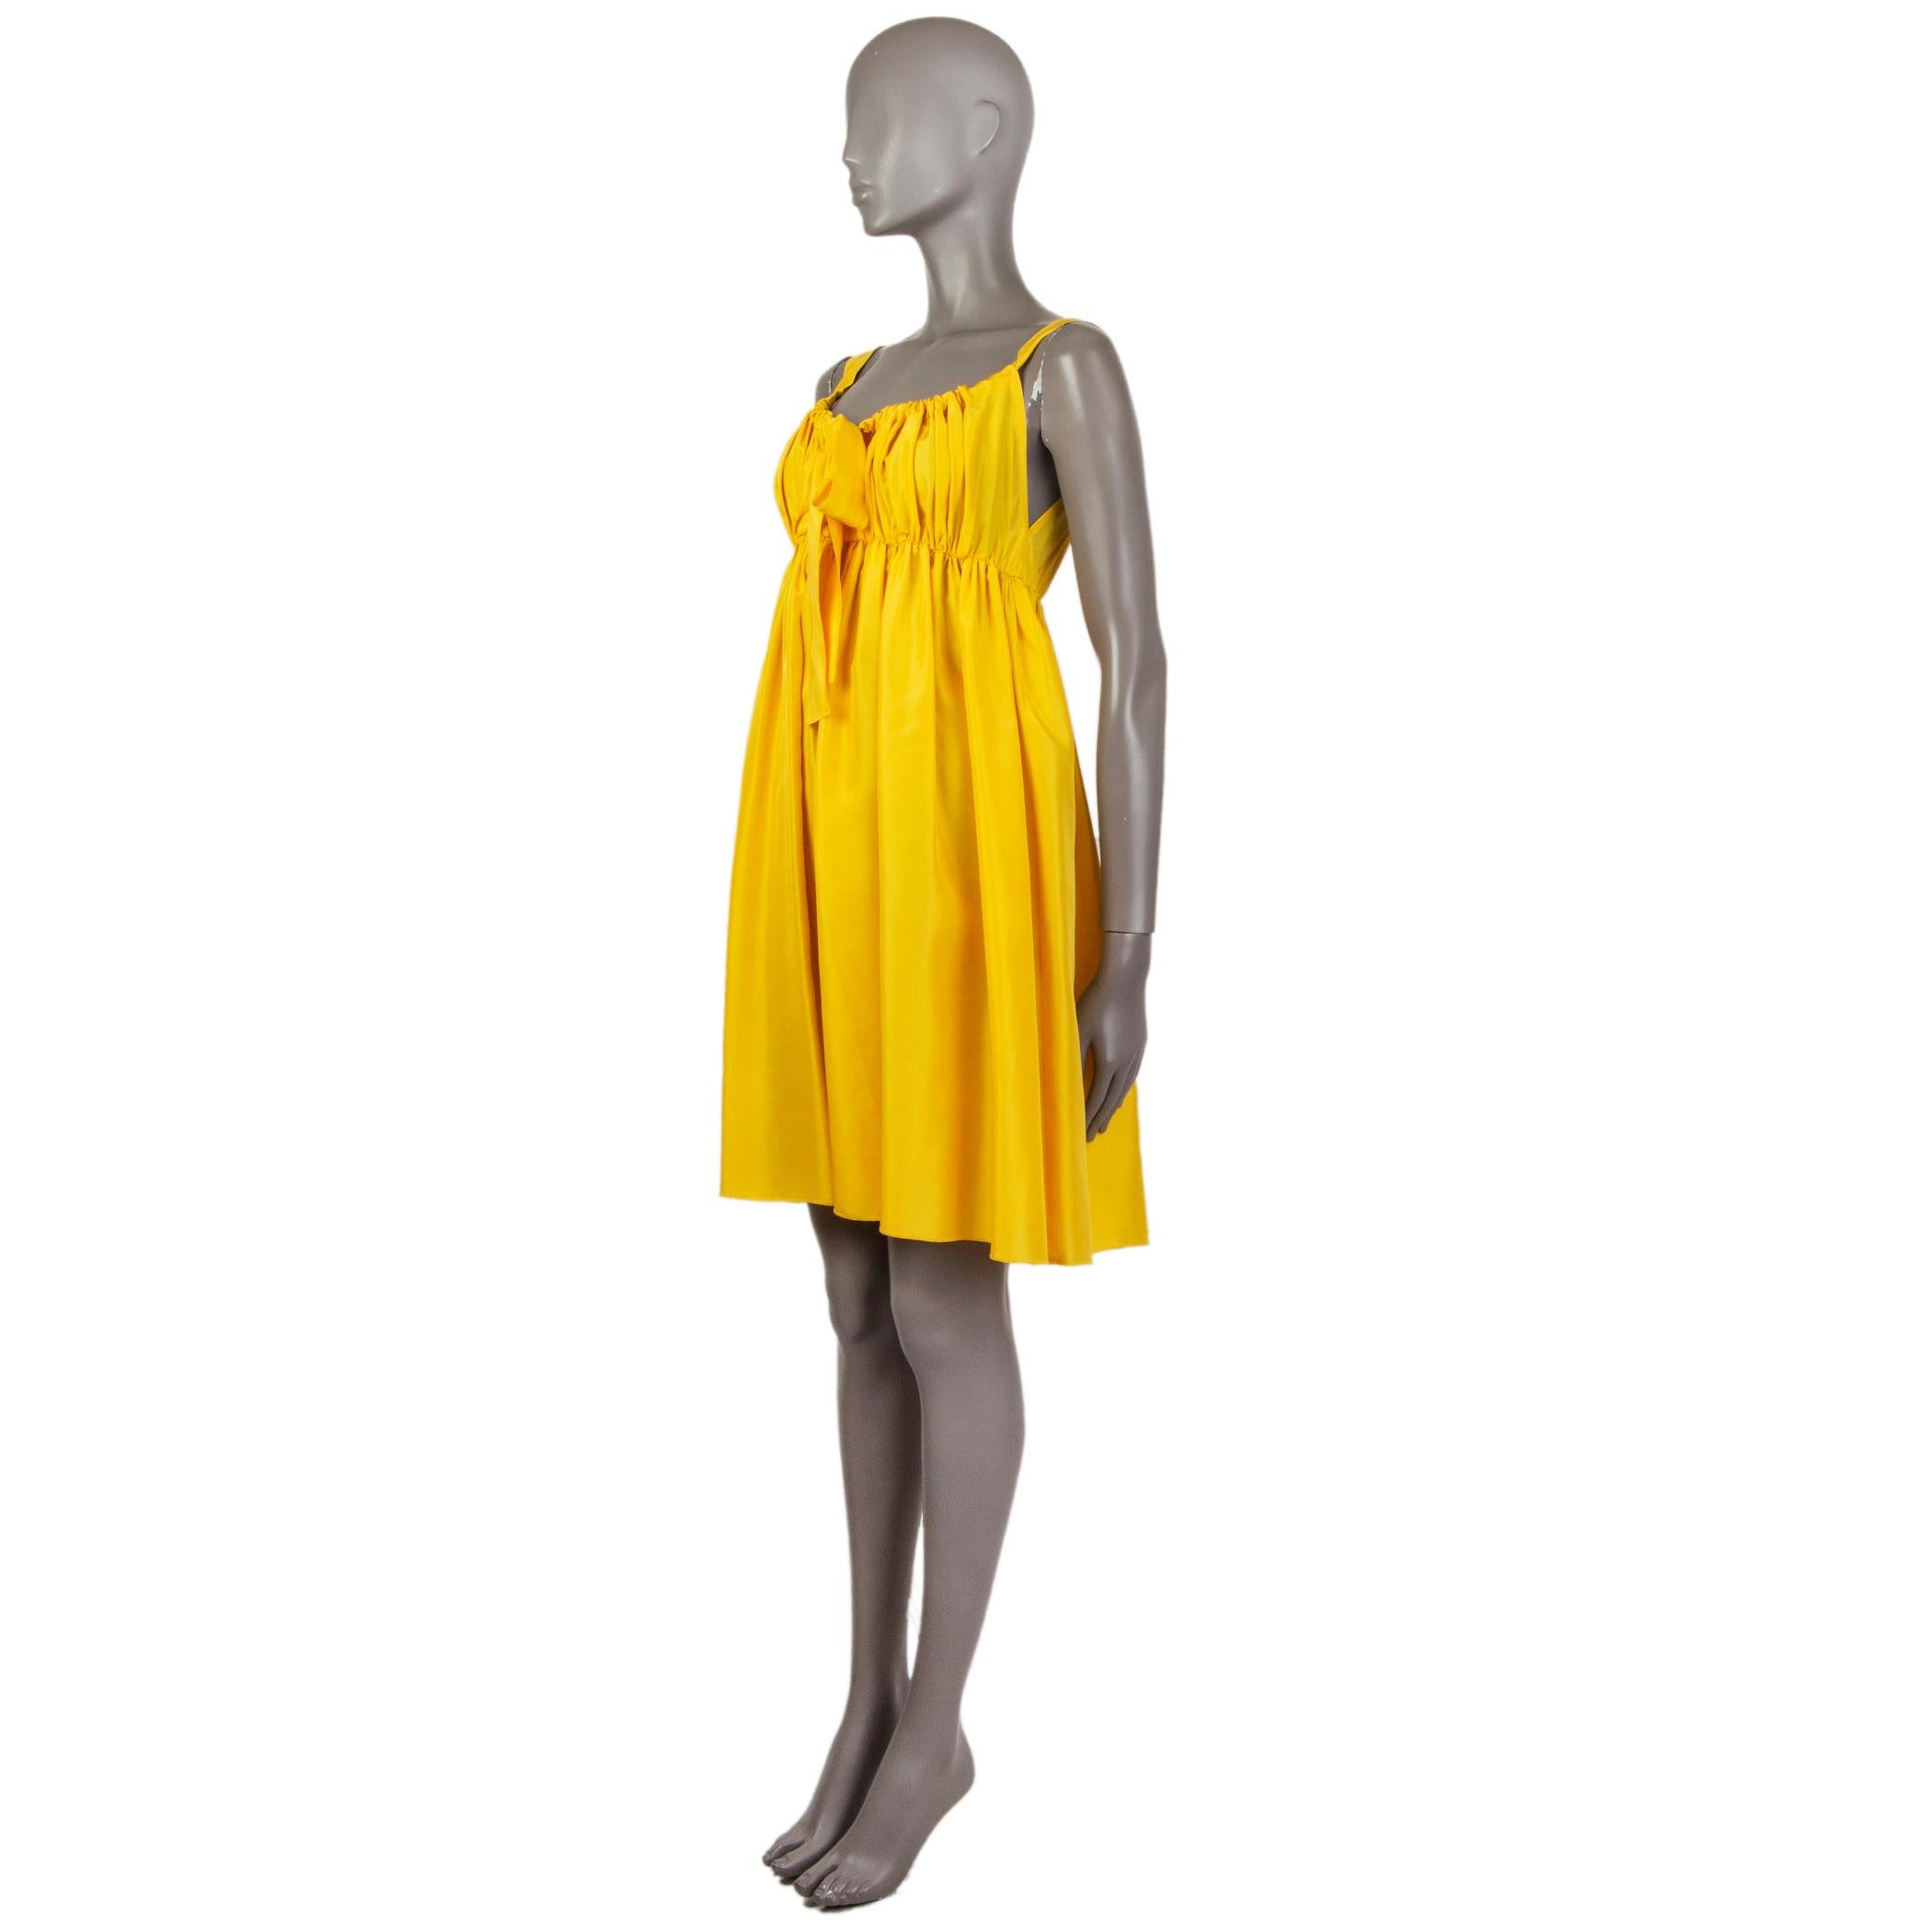 Dolce & Gabbana sleeveless summer dress in yellow silk (100%) with a scoop neck. Has a front bow. Unlined. Has been worn and is in excellent condition. 

Tag Size 40
Size S
Shoulder Width 30cm (11.7in)
Bust 54cm (21.1in) to 56cm (21.8in)
Waist 54cm